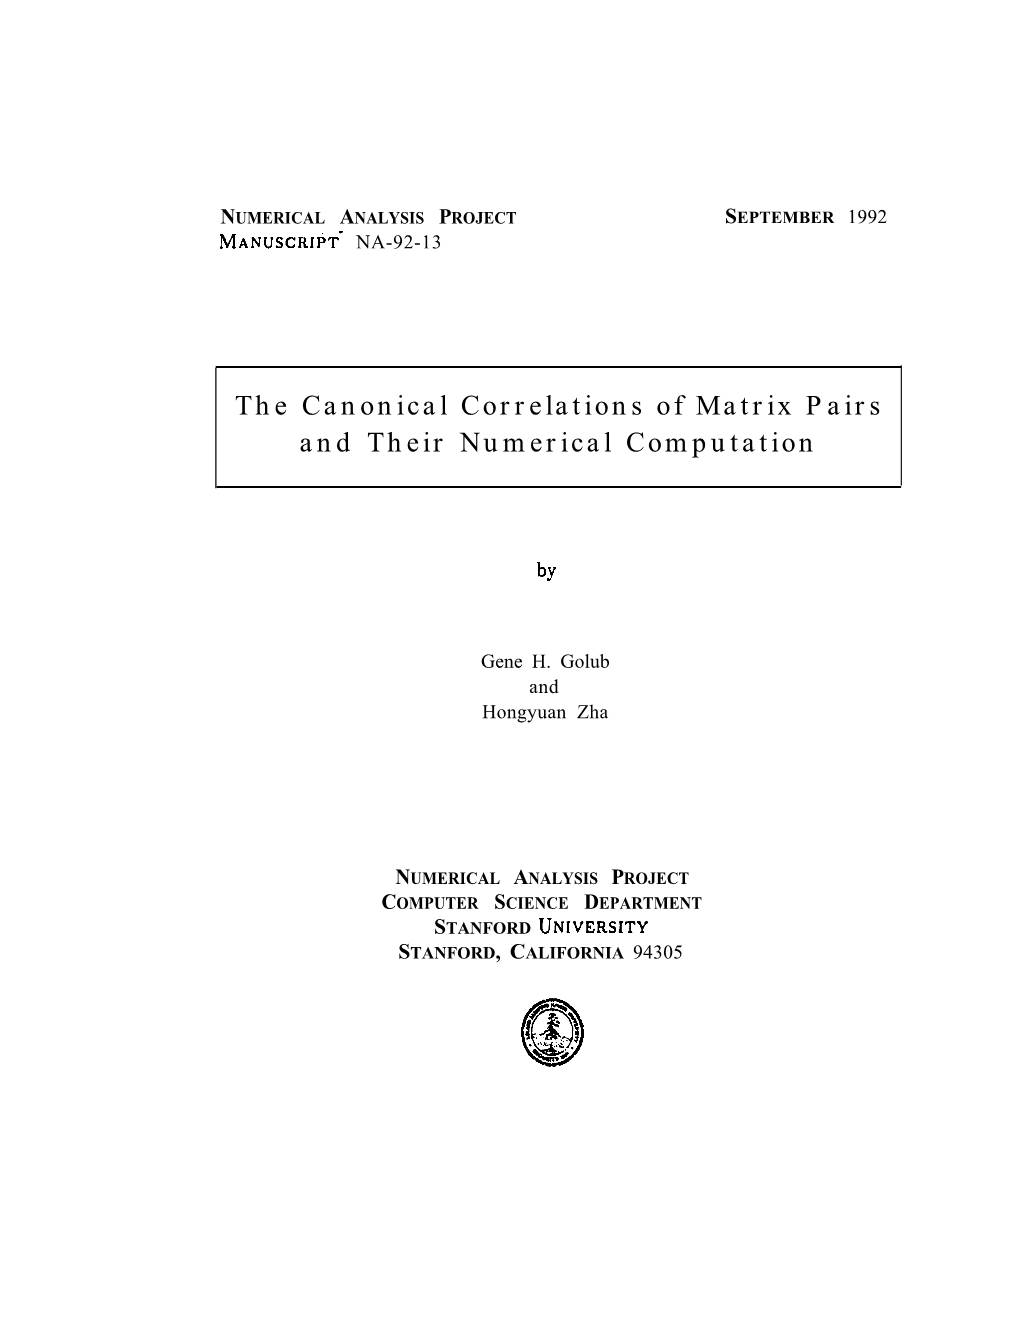 The Canonical Correlations of Matrix Pairs and Their Numerical Computation